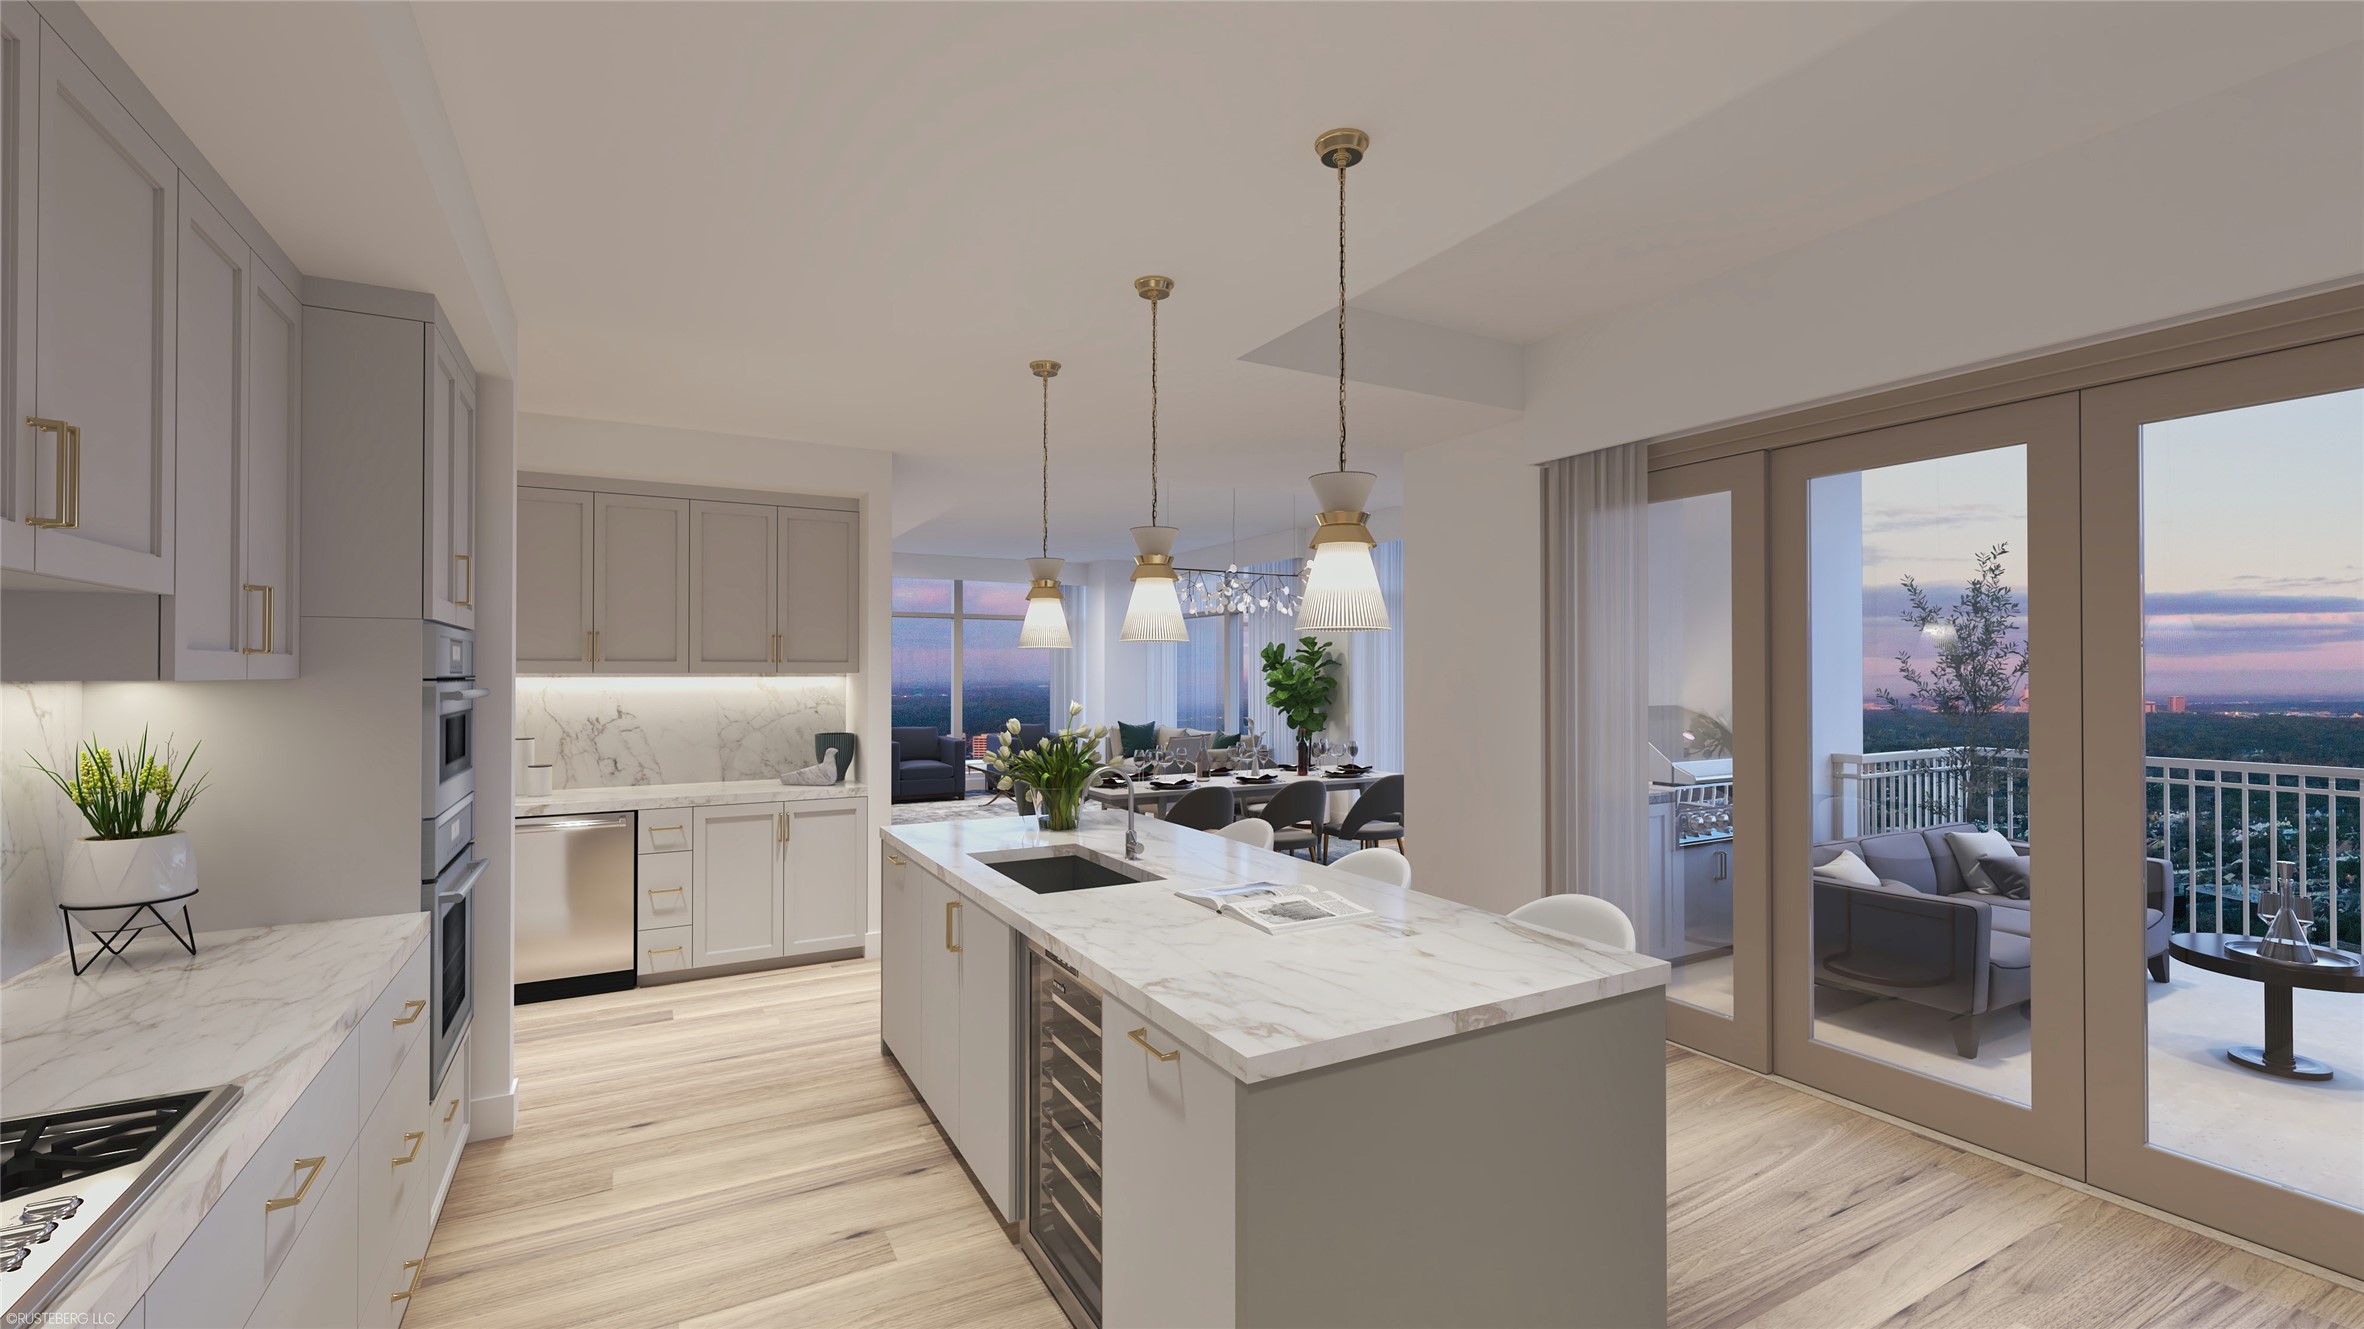 Featuring floor-to-ceiling panoramic windows, the dining enclave offers dinner with a view. Sweeping vistas framed by recessed ceilings create an atmosphere of premiere elegance.